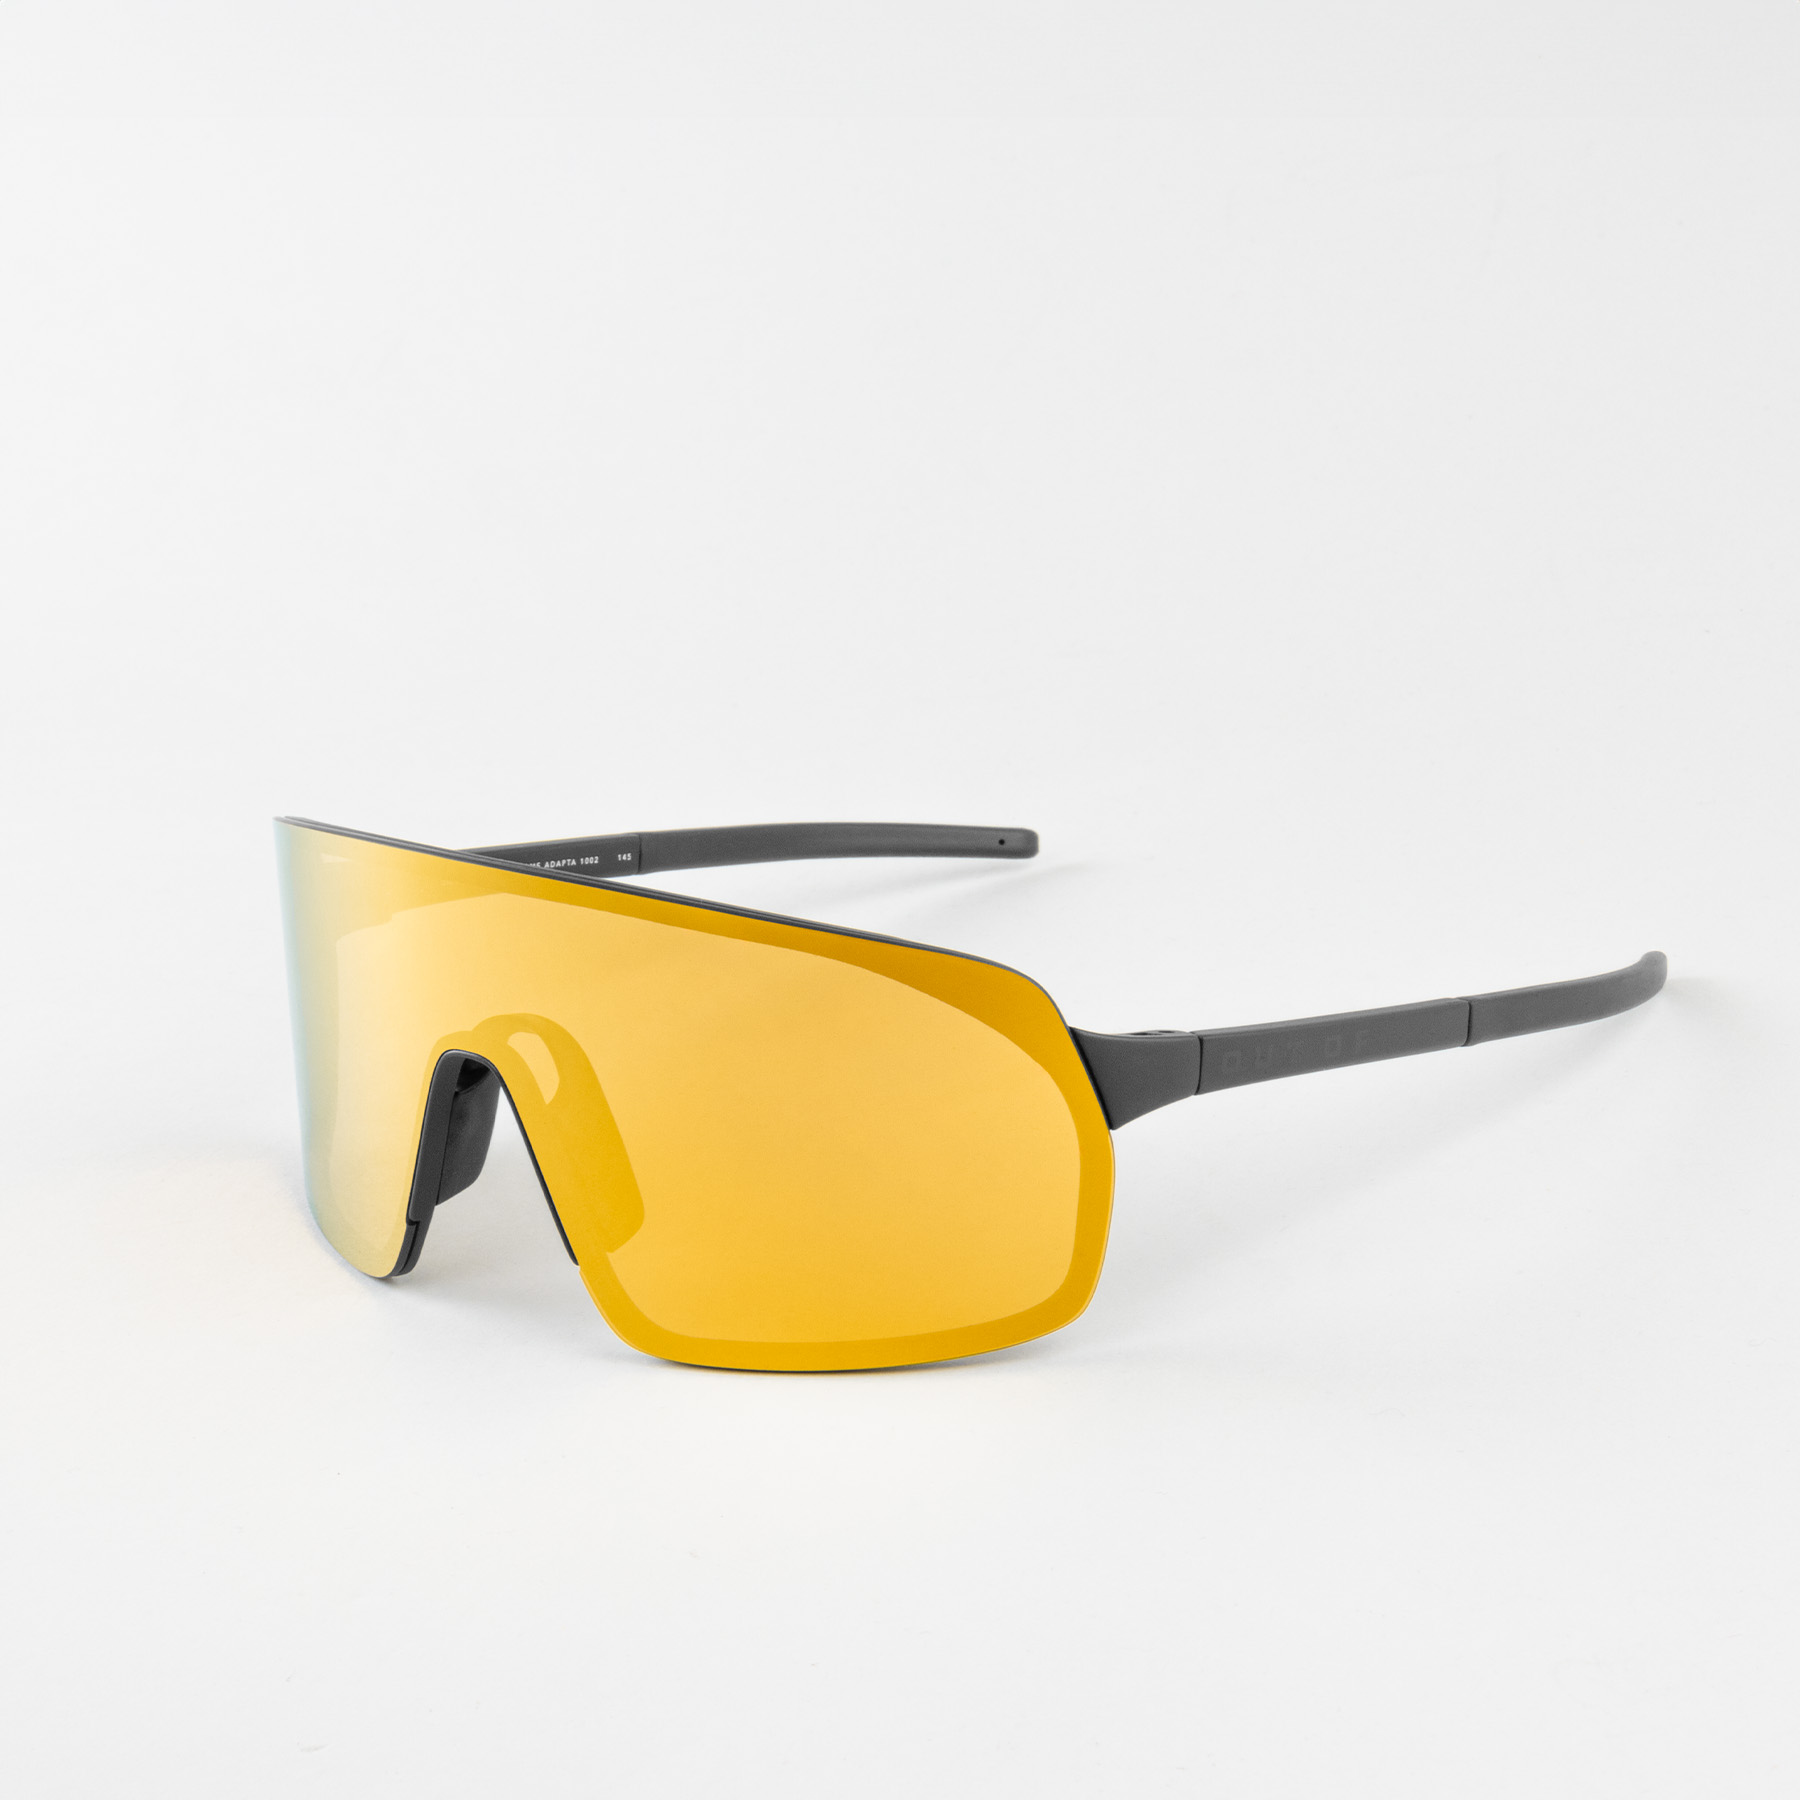 Sports sunglasses OUT OF Rams Gold on the white background, view slightly from the side